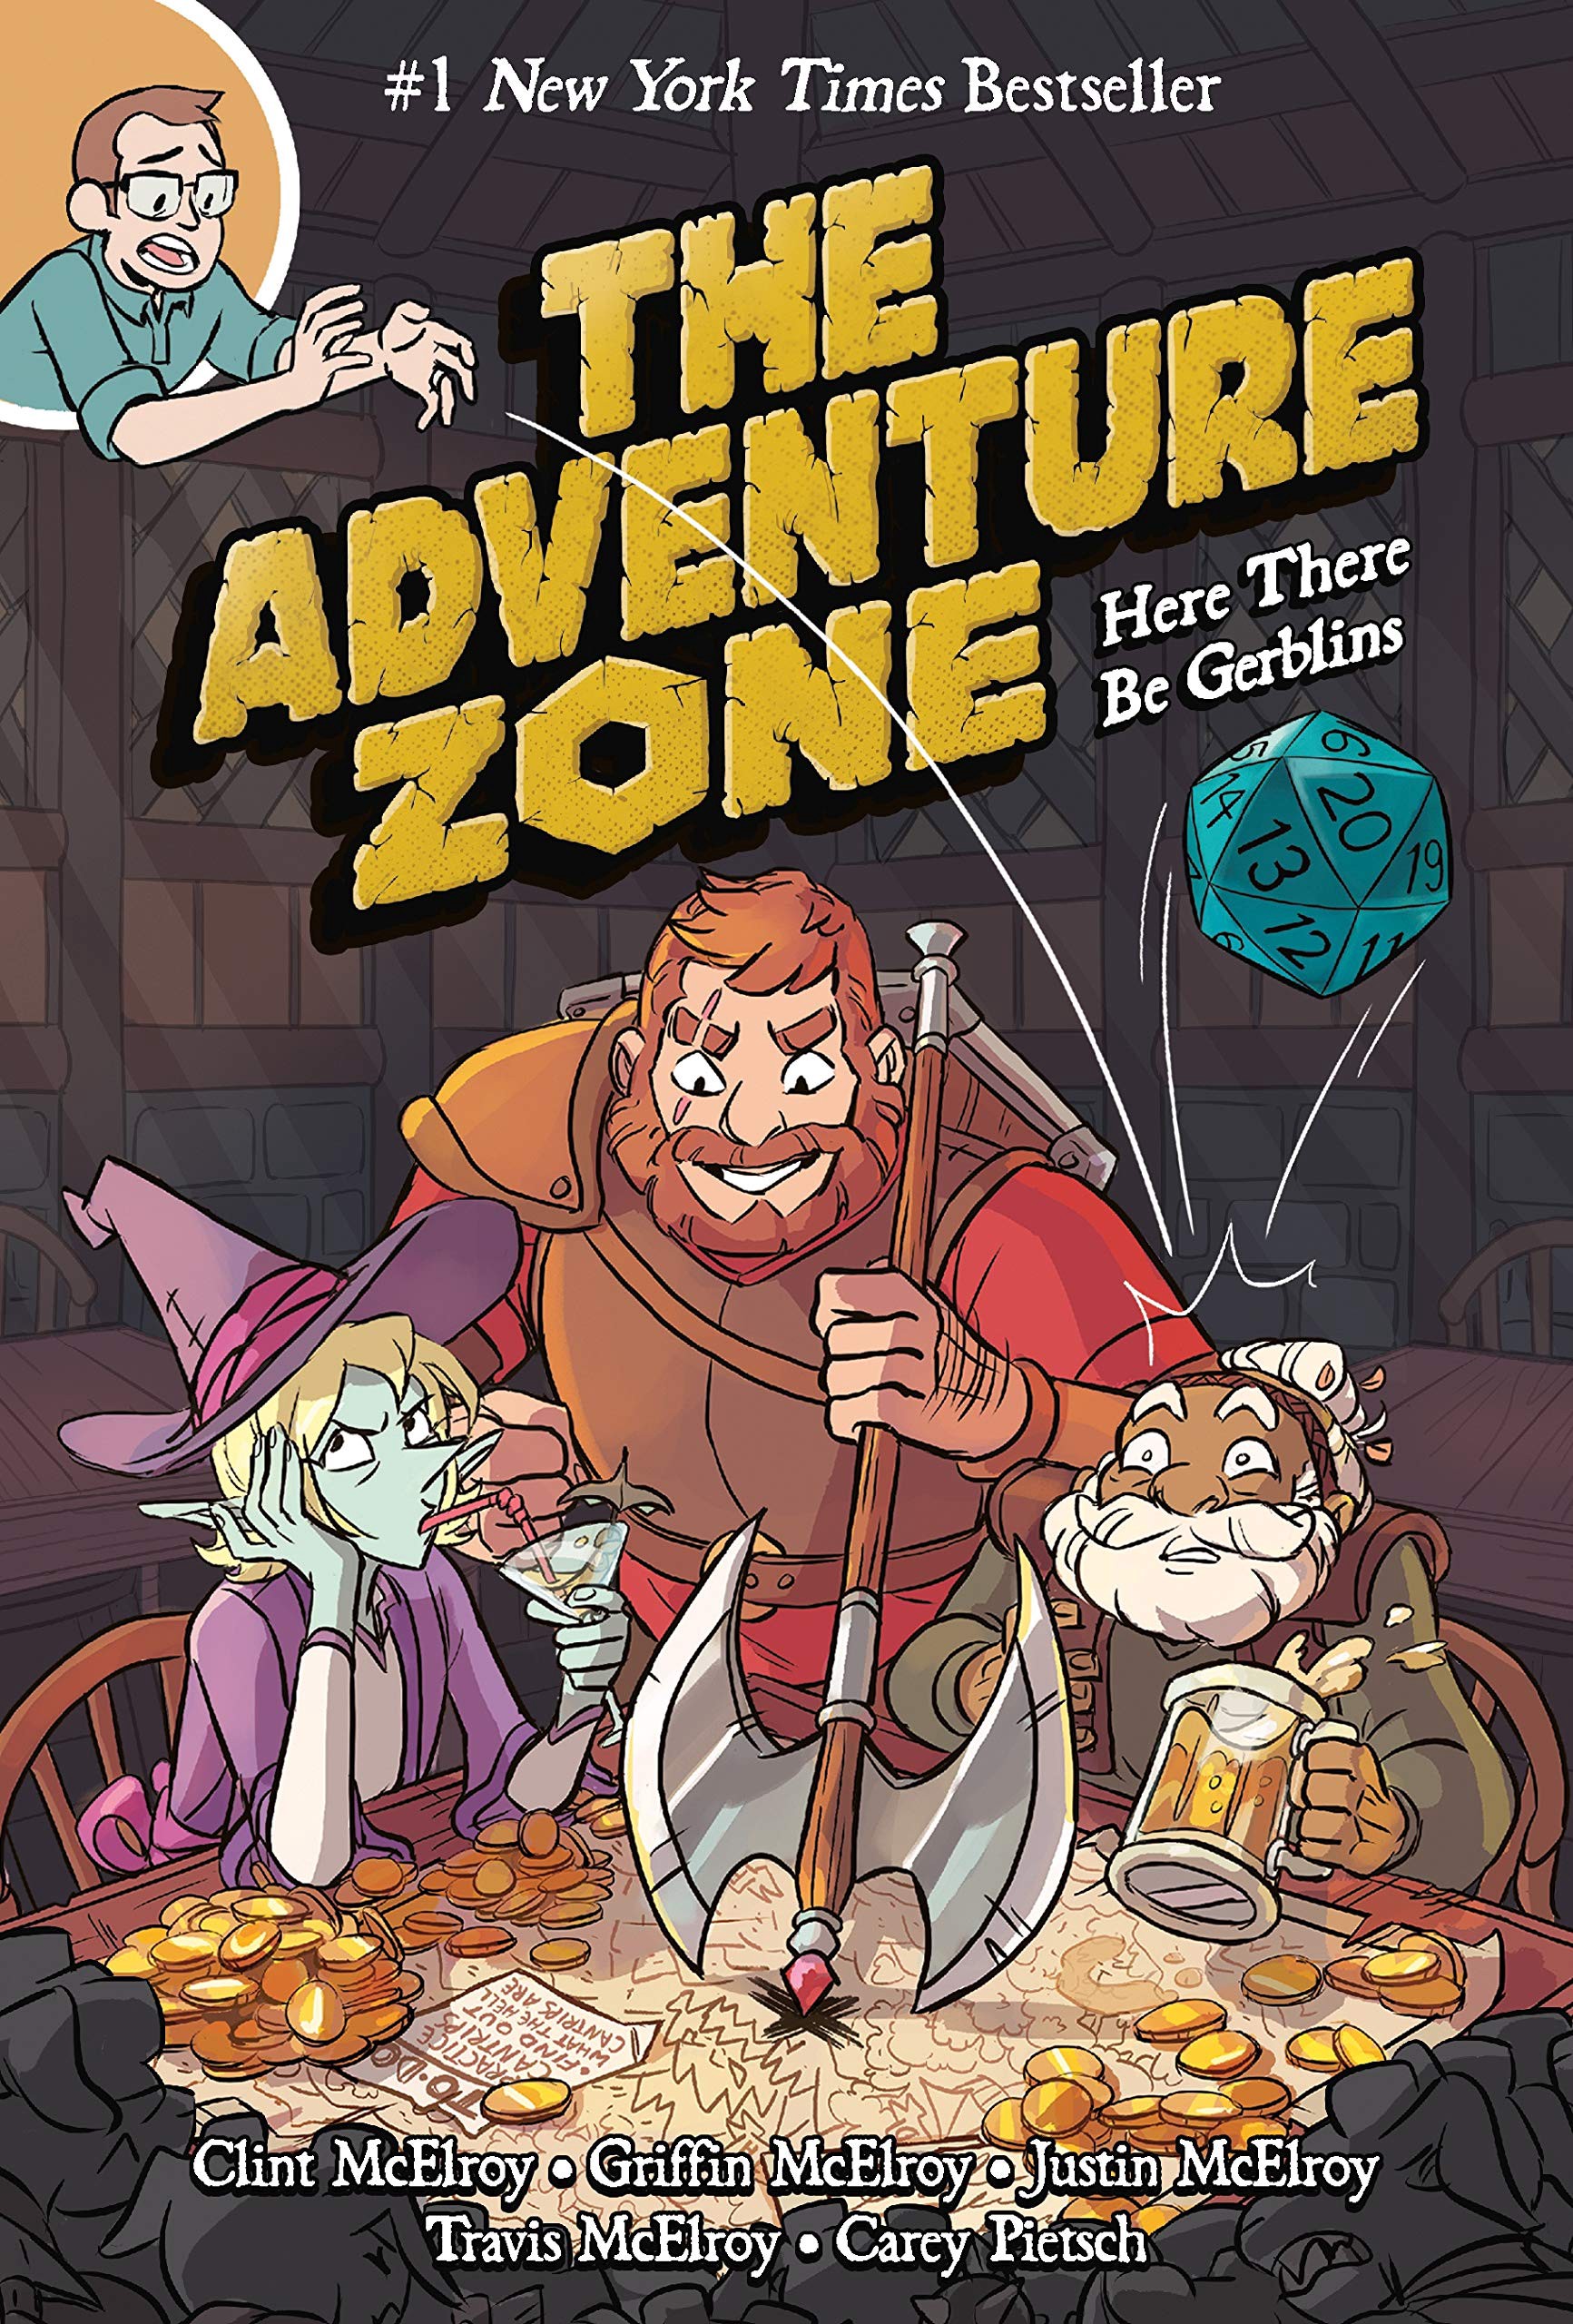 The cover of The Adventure Zone graphic novel. (Clint McElroy, Griffin Mcelroy, Justin McElroy, Travis McElroy, Caret Pietsch, First Second, 2018.)